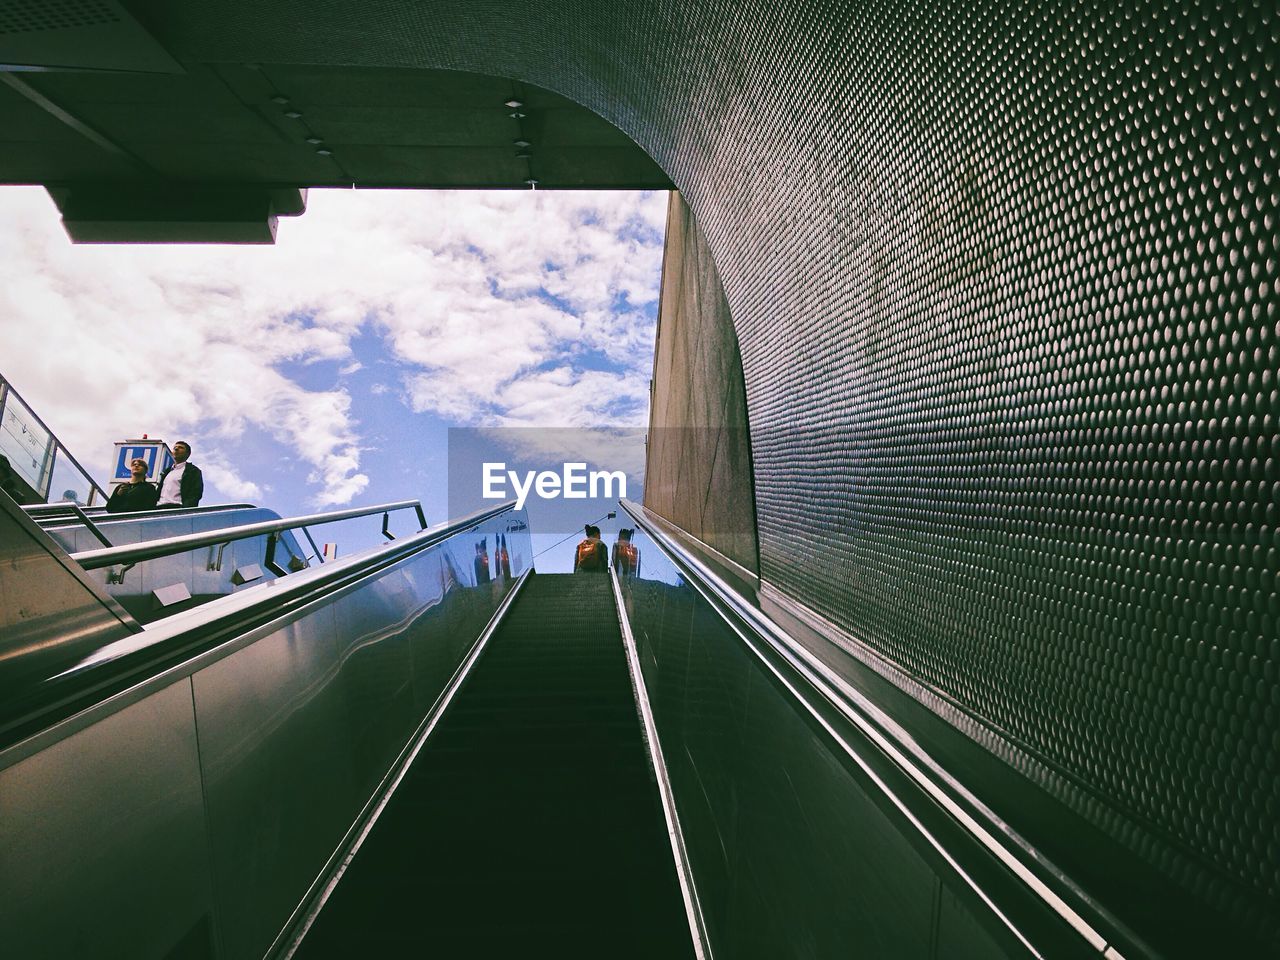 Low angle view of escalator against sky